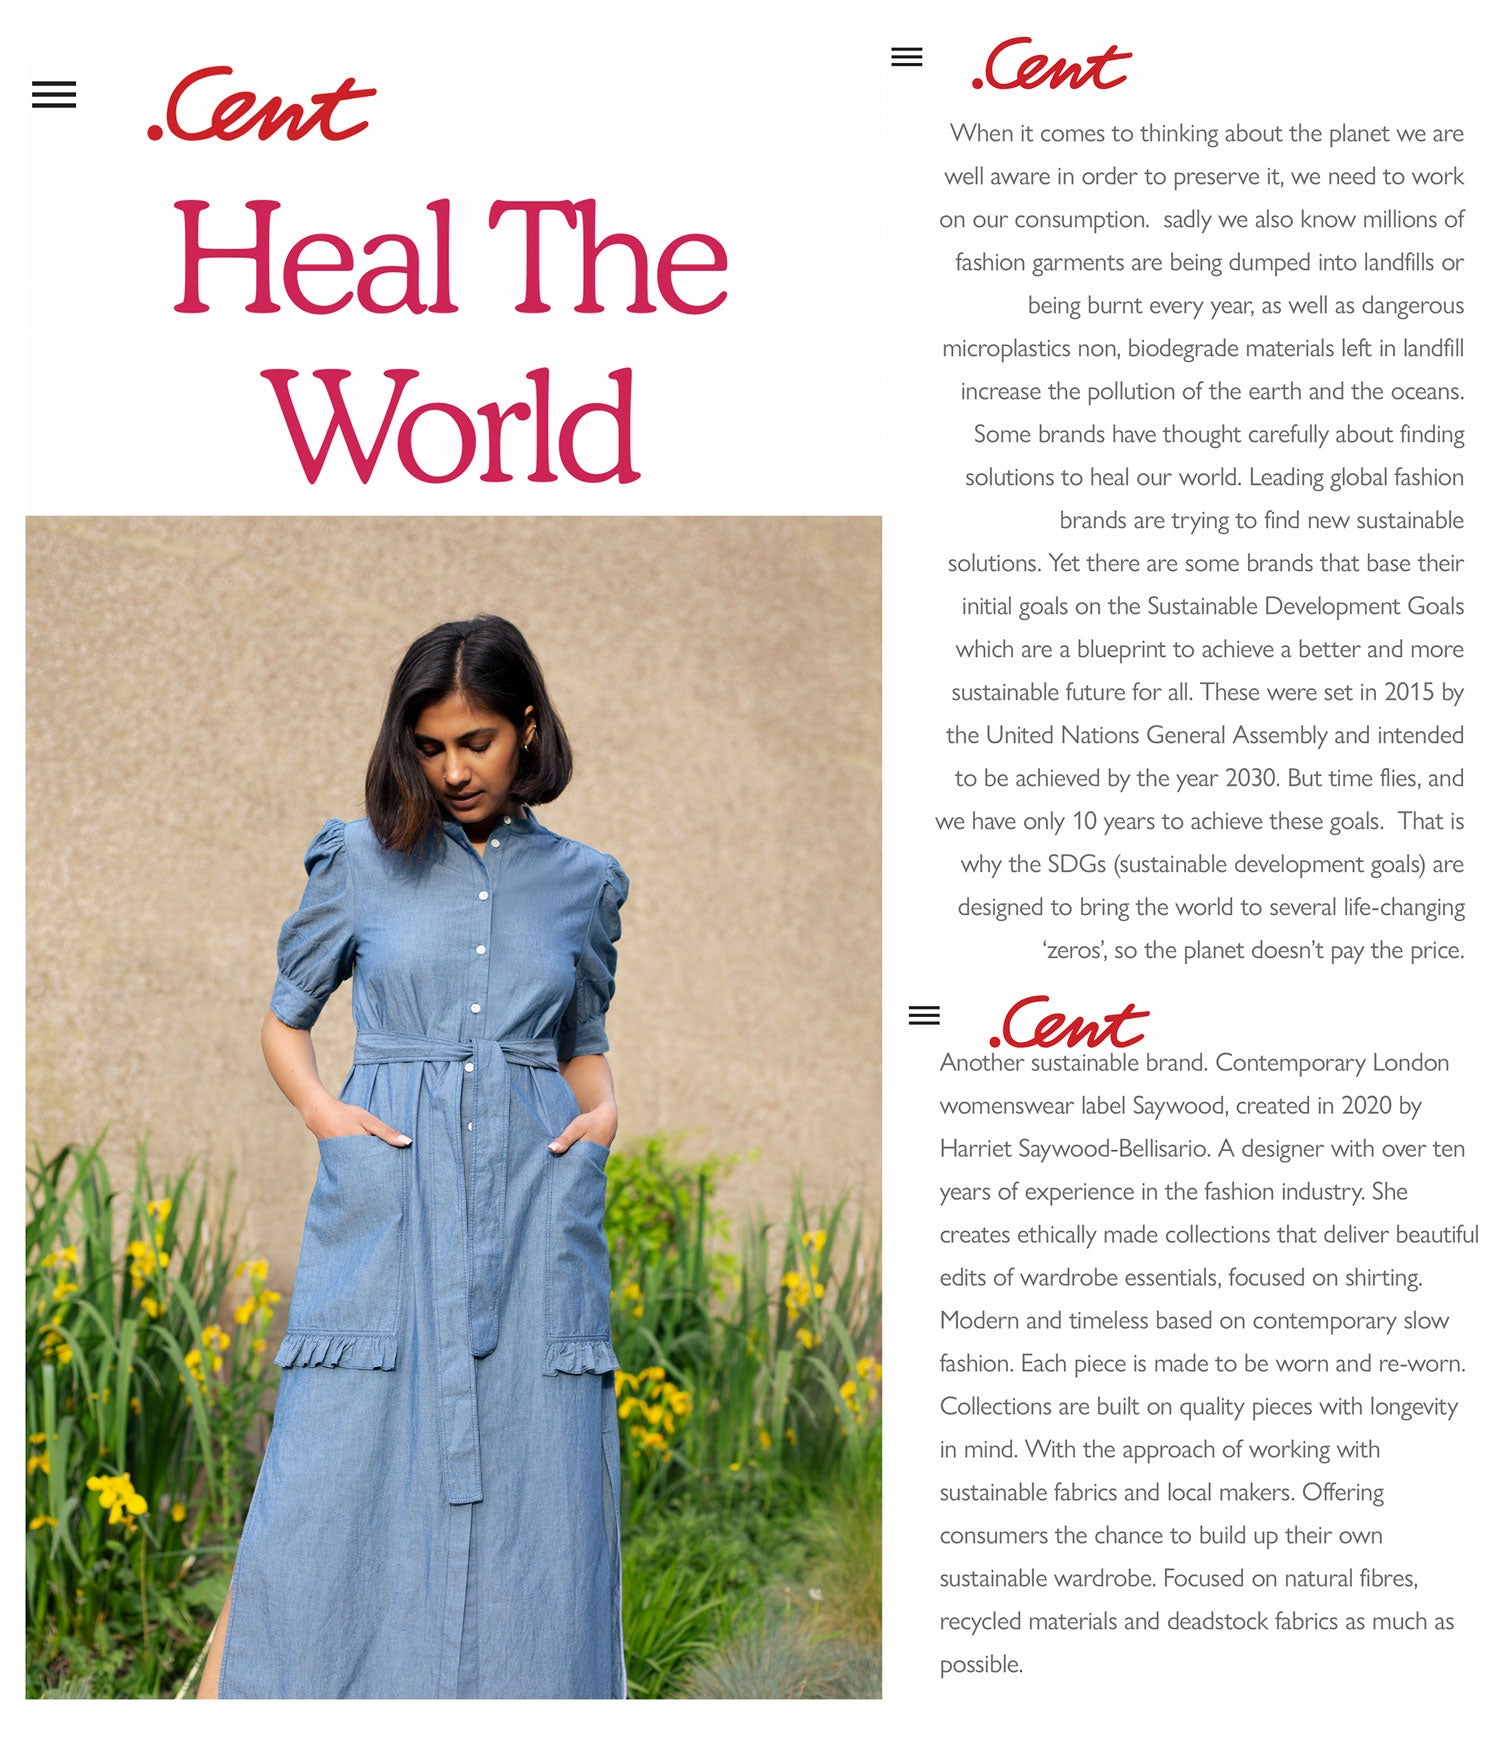 Clipping of CENT Magazine Heal The World Article featuring Saywood. Image of model wearing Saywood's Rosa Puff Sleeve Dress in Japanese denim